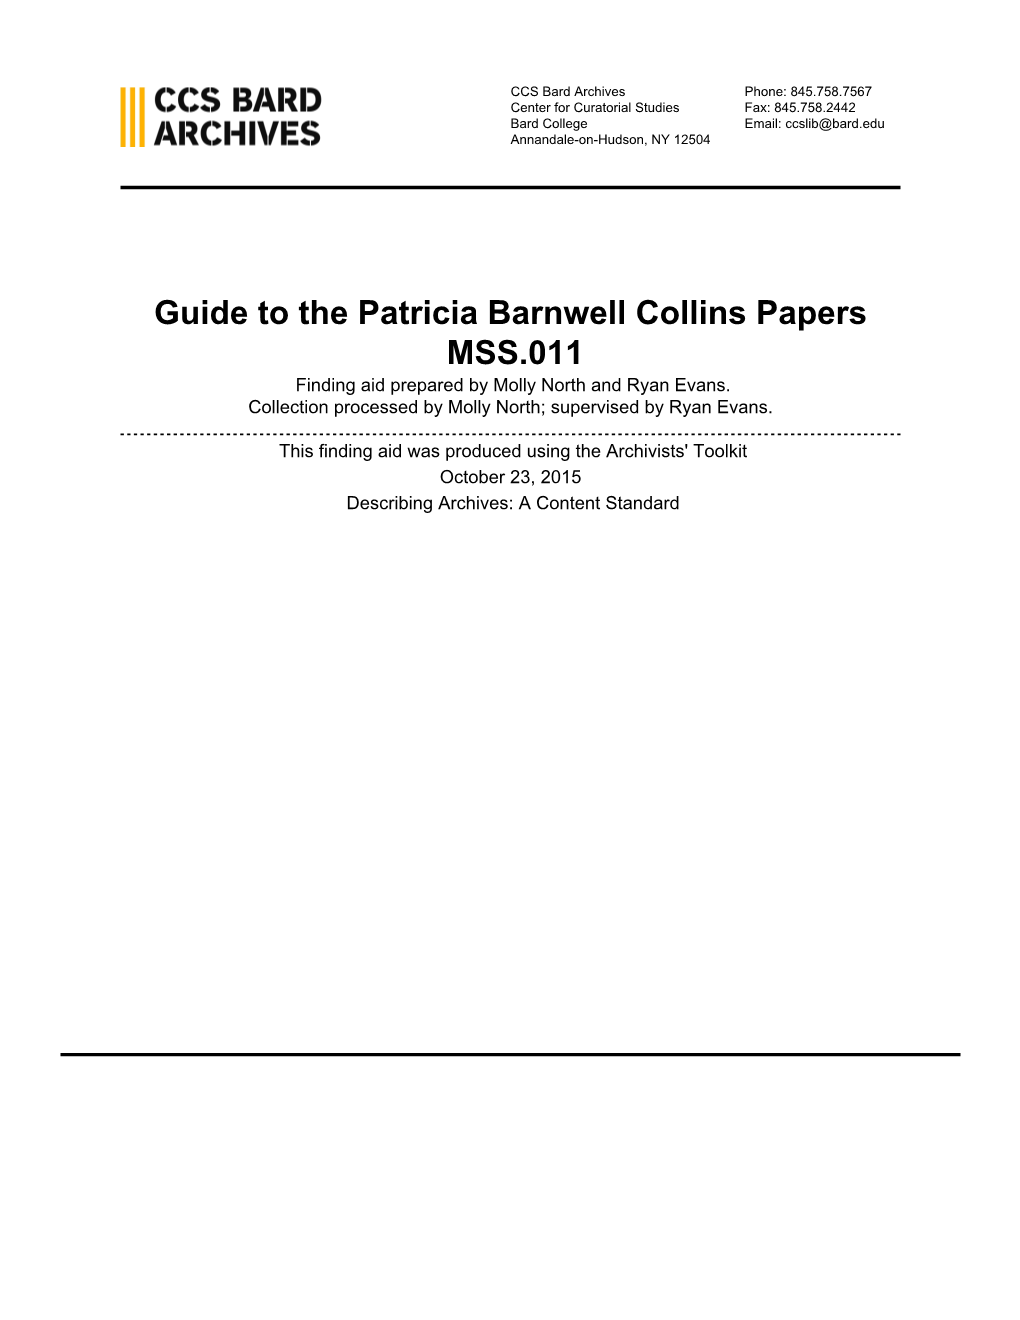 Guide to the Patricia Barnwell Collins Papers MSS.011 Finding Aid Prepared by Molly North and Ryan Evans